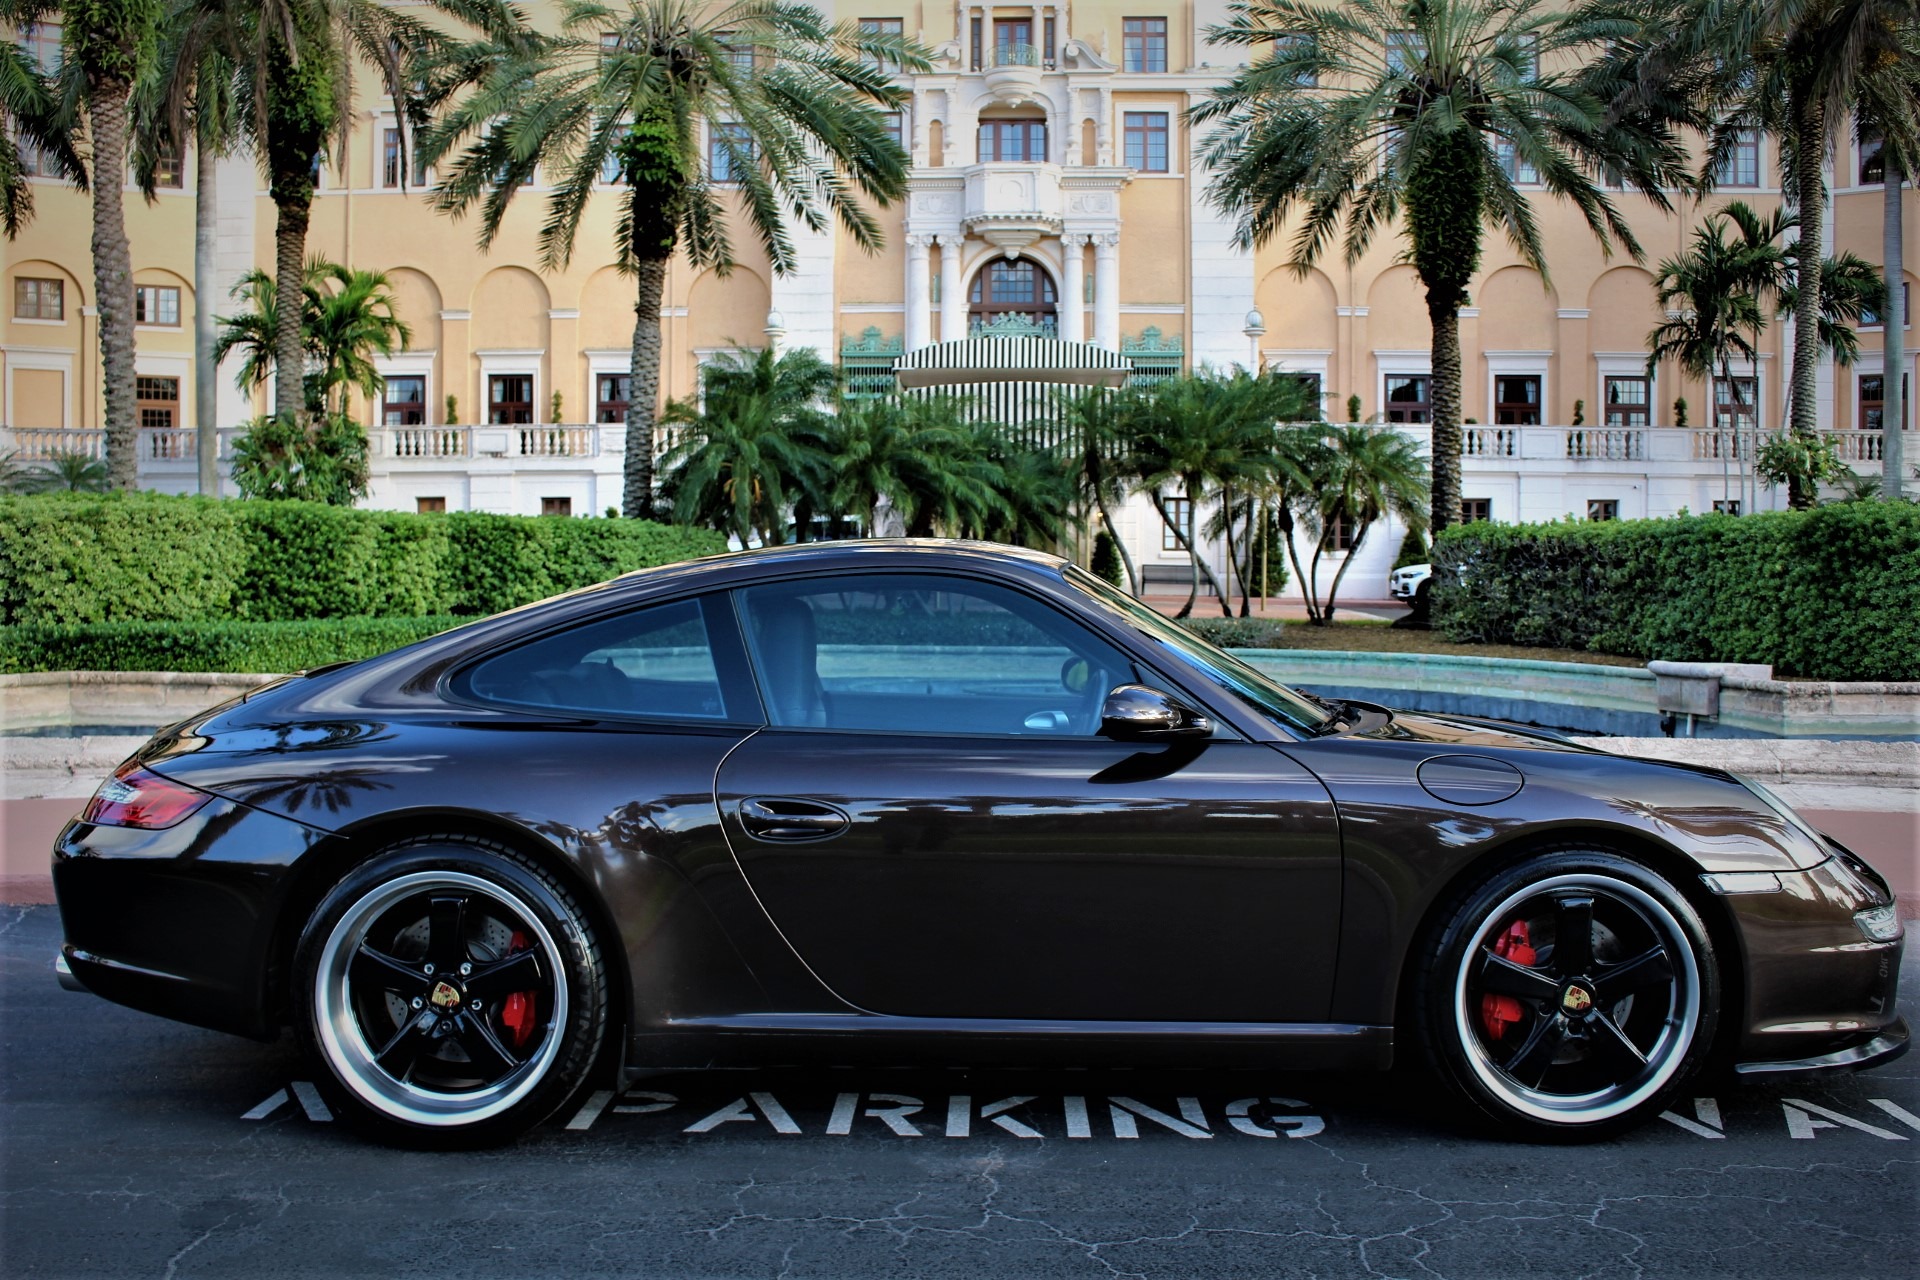 Used 2008 Porsche 911 Carrera S for sale Sold at The Gables Sports Cars in Miami FL 33146 1